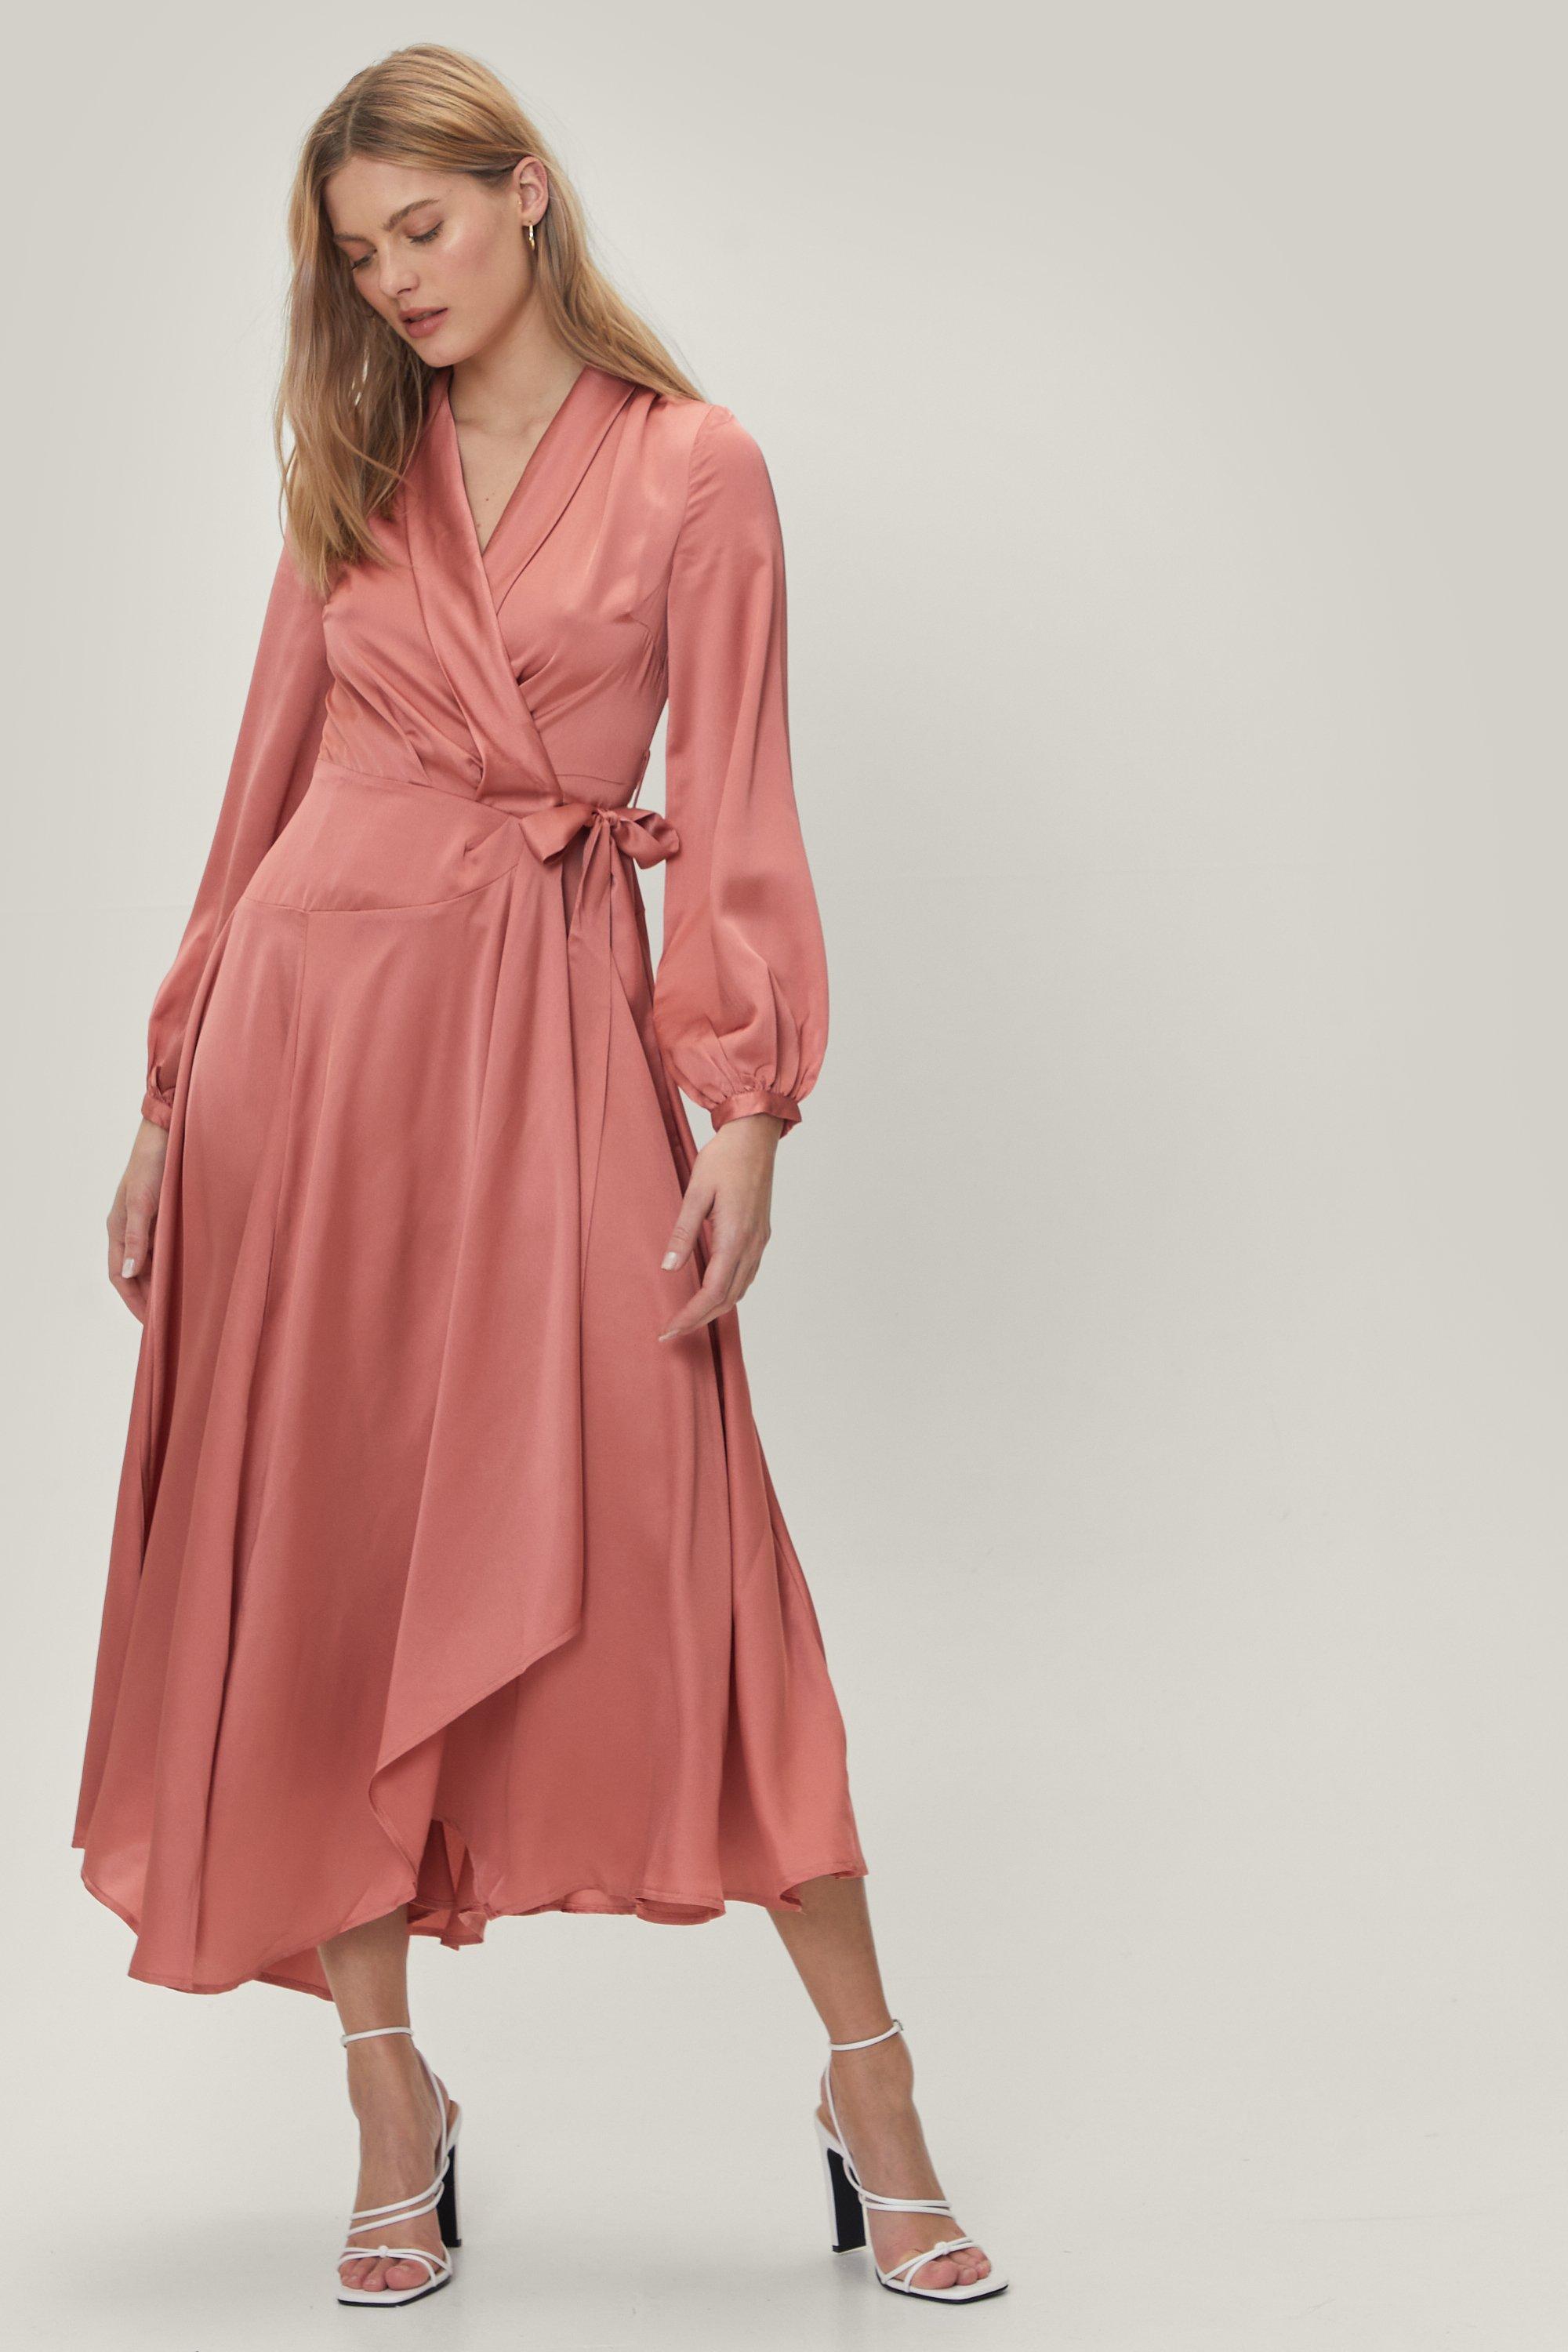 Nasty Gal Satin Long Sleeve Maxi Wrap Dress in Rose (Pink) | Lyst